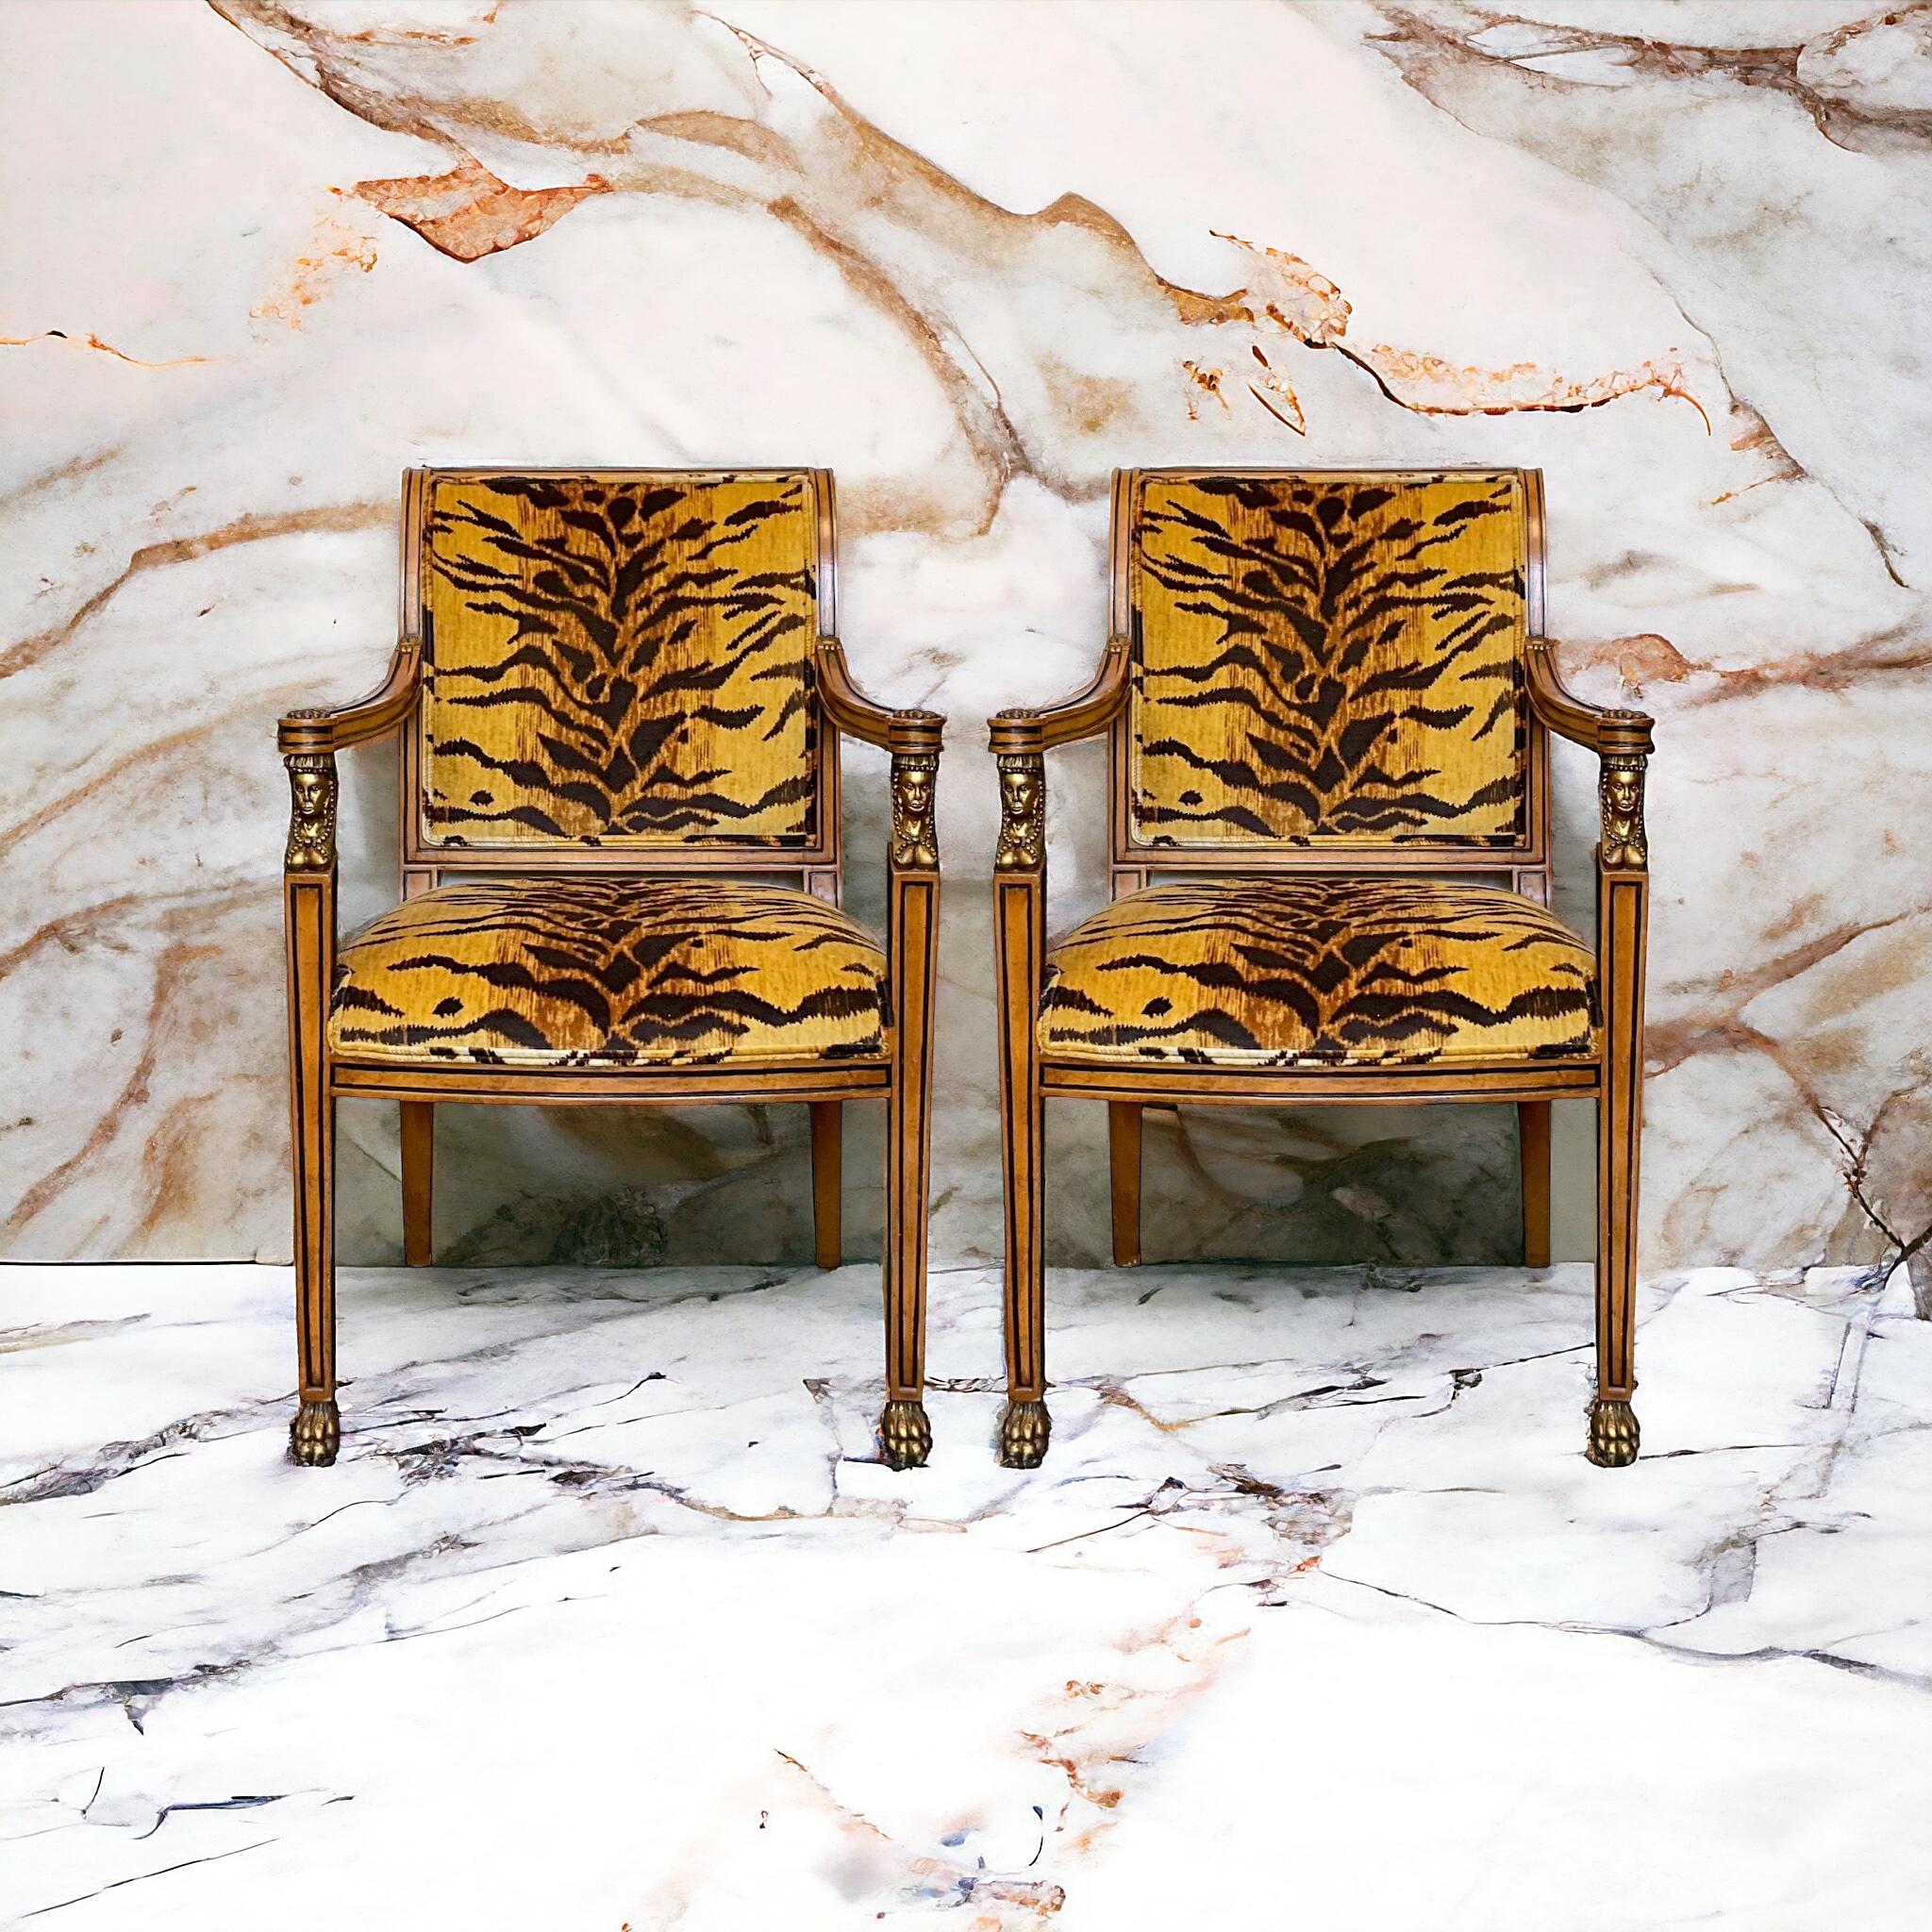 American Early 20th-C. Egyptian Revival Style Bergere Chairs In Tiger Velvet - Pair For Sale